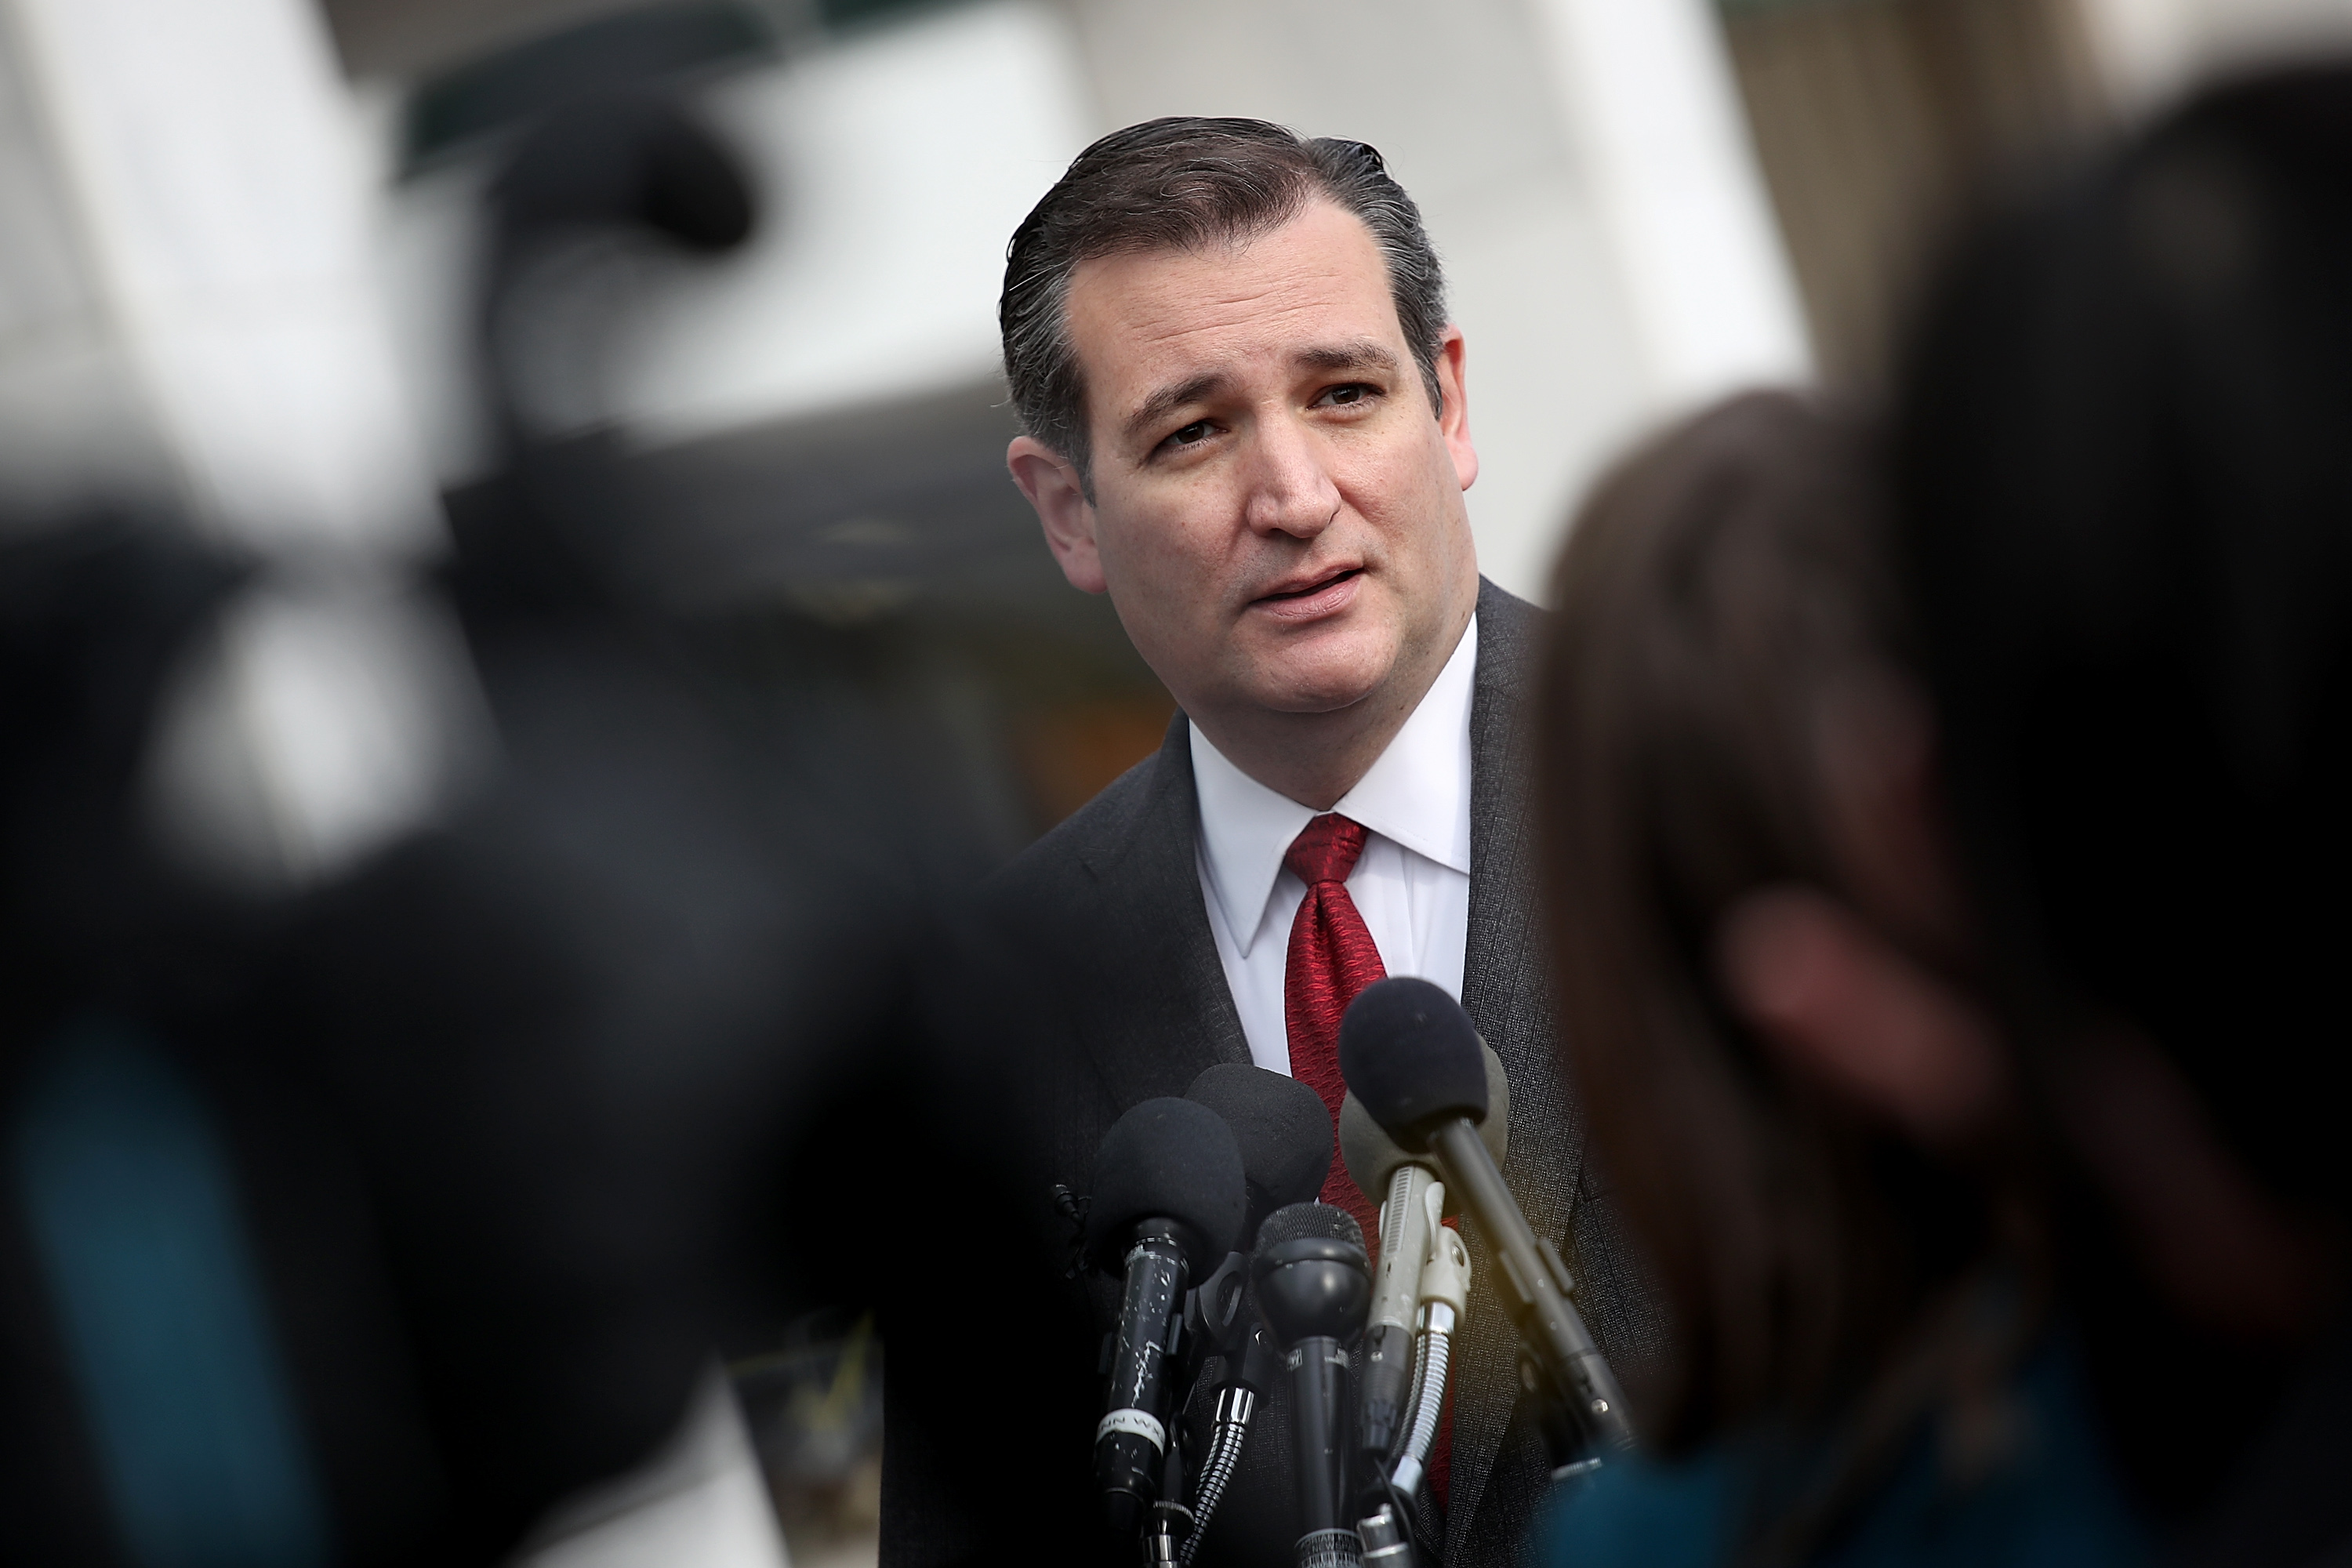 Republican presidential candidate Sen. Ted Cruz (R-TX) addresses the bombings in Brussels during remarks in Washington, D.C., on March 22, 2016. (Win McNamee—Getty Images)